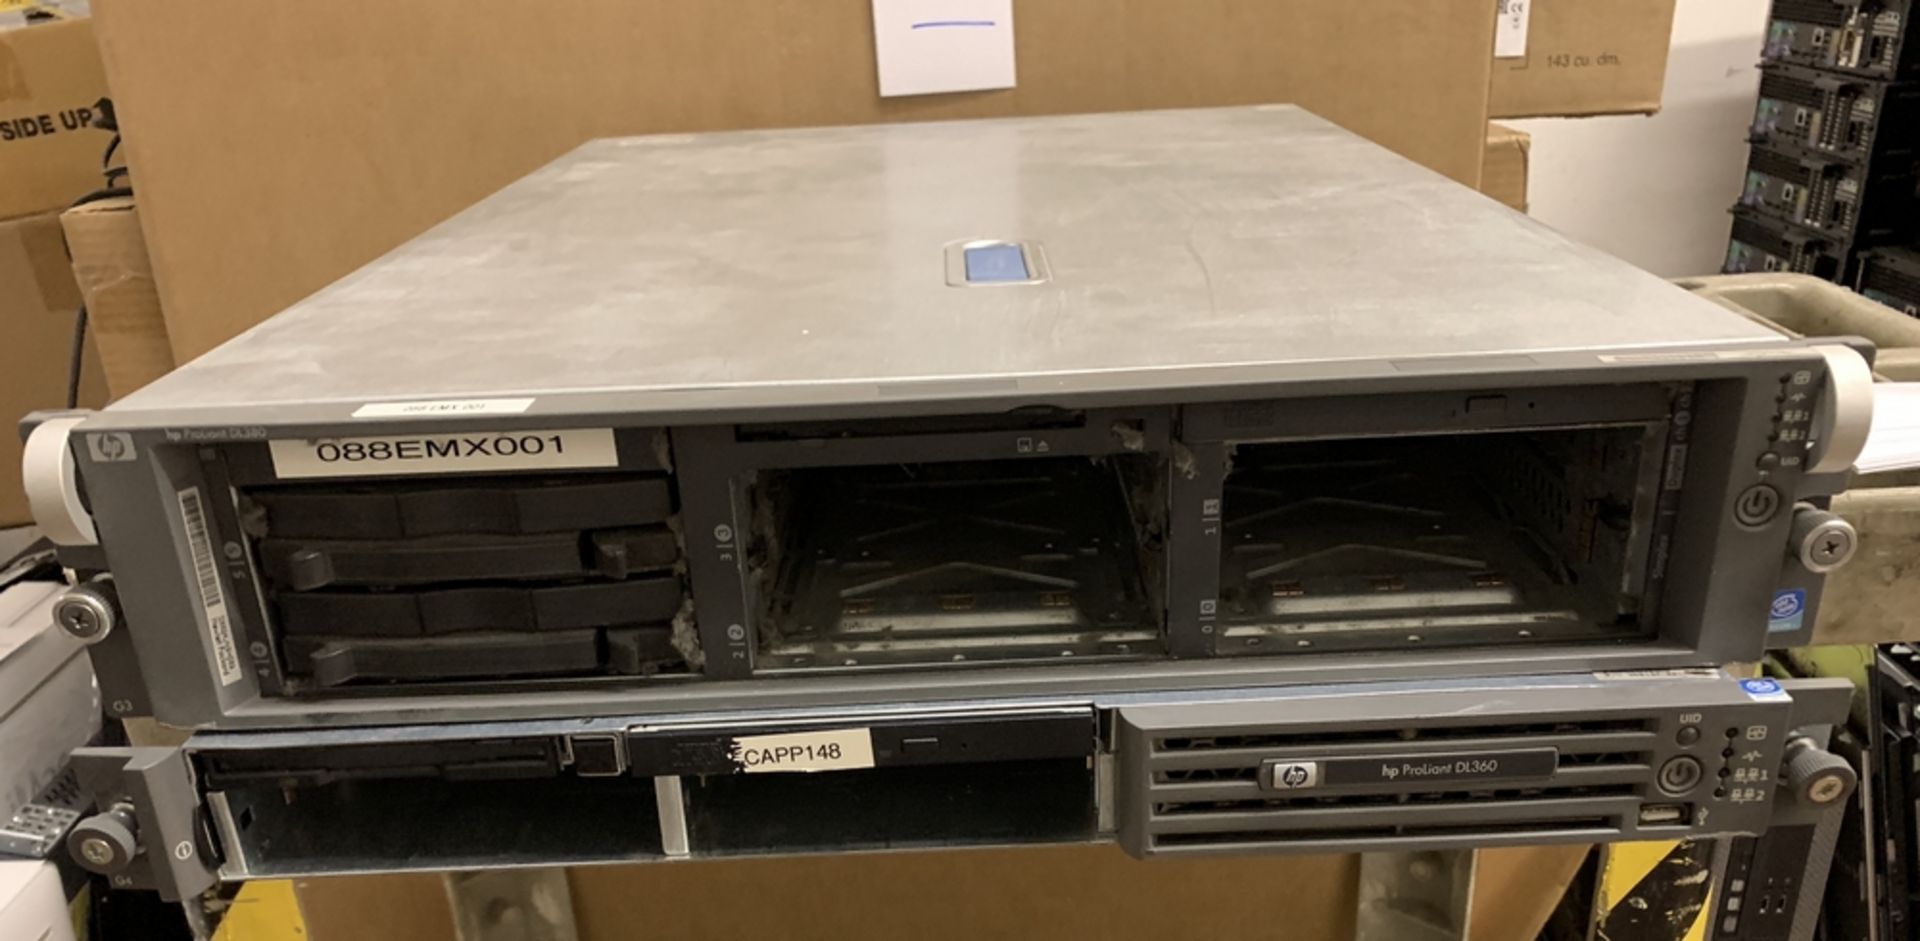 2 X SERVER UNITS / HP ProLiant DL360 G8 Server + HP DL380 ALL SLOTS ARE EMPTY ALL ITEMS ARE SOLD - Image 2 of 4